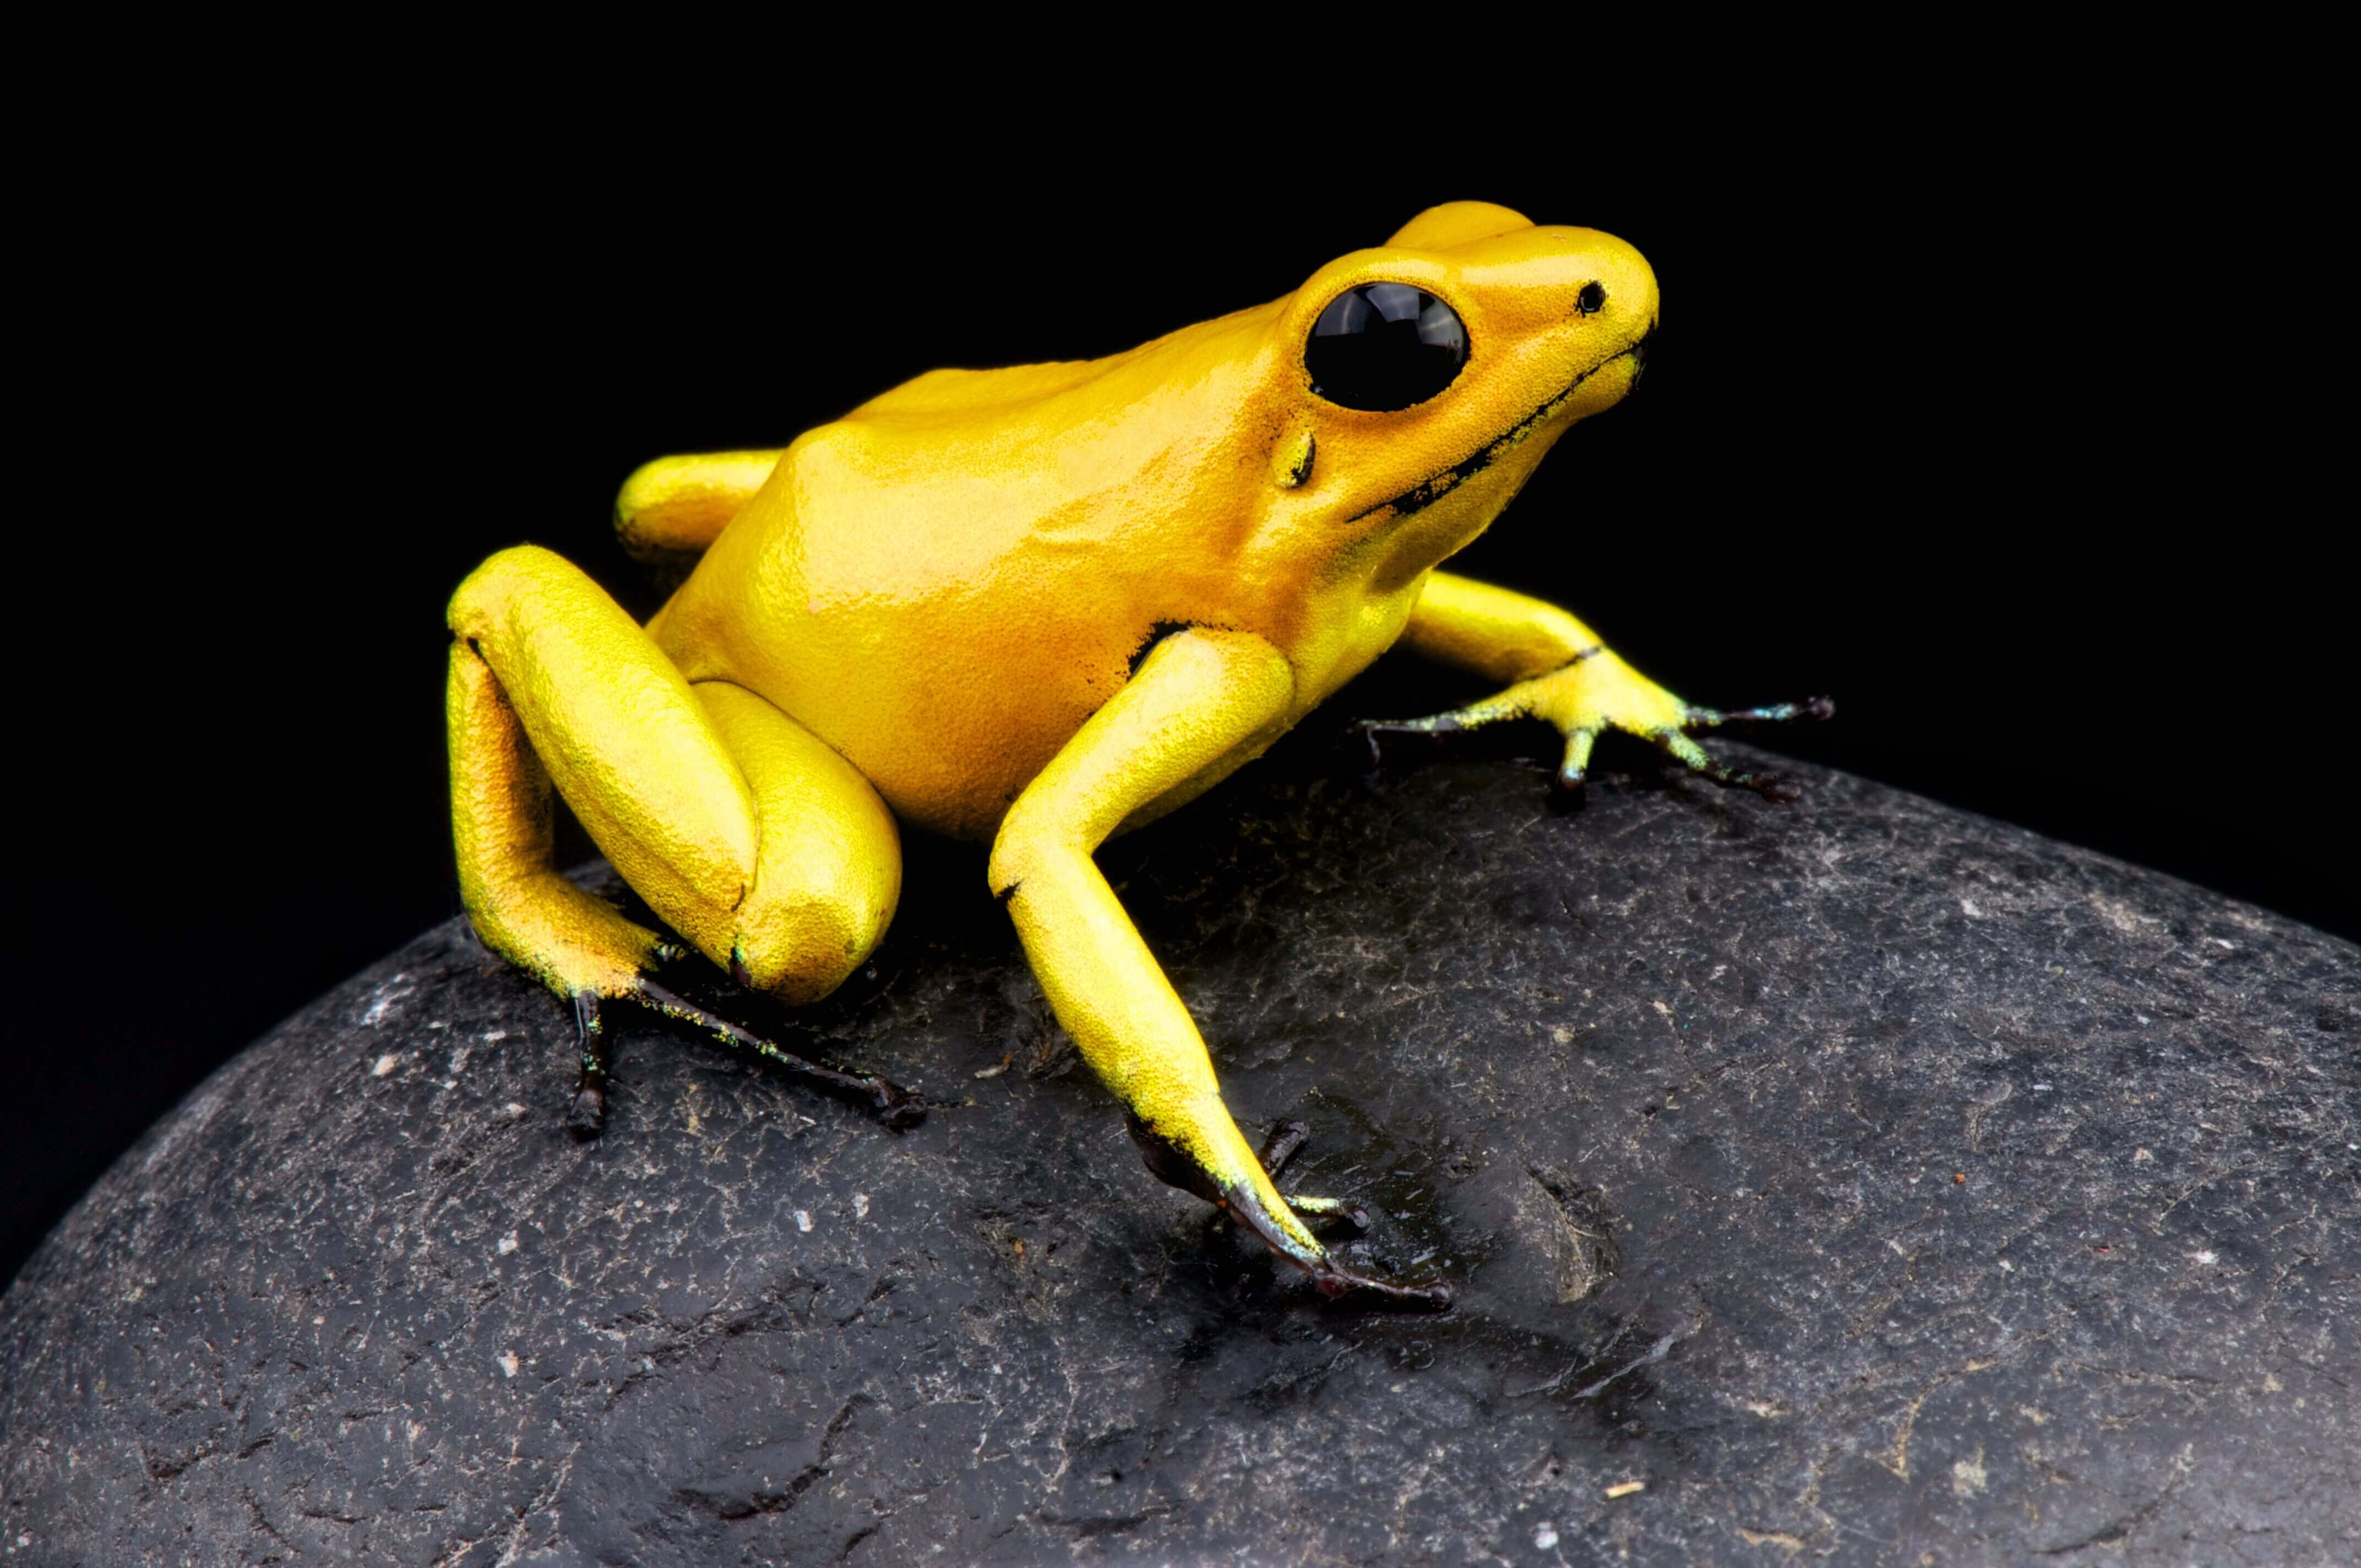 The most poisonous creature in animal kingdom: the Golden Poison Frog